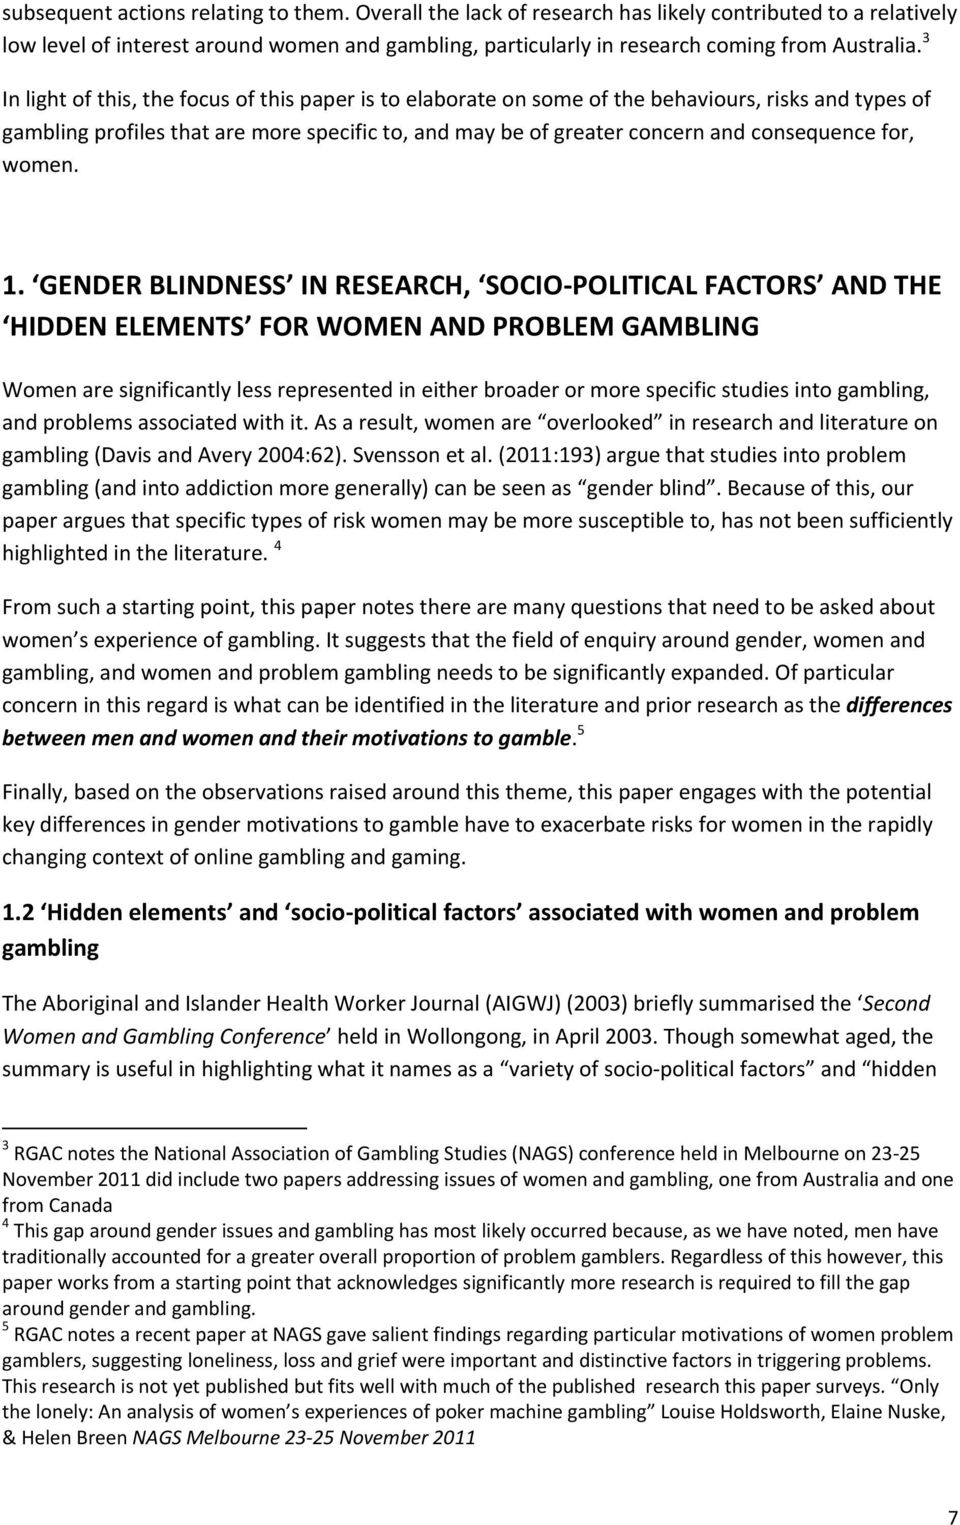 3 In light of this, the focus of this paper is to elaborate on some of the behaviours, risks and types of gambling profiles that are more specific to, and may be of greater concern and consequence